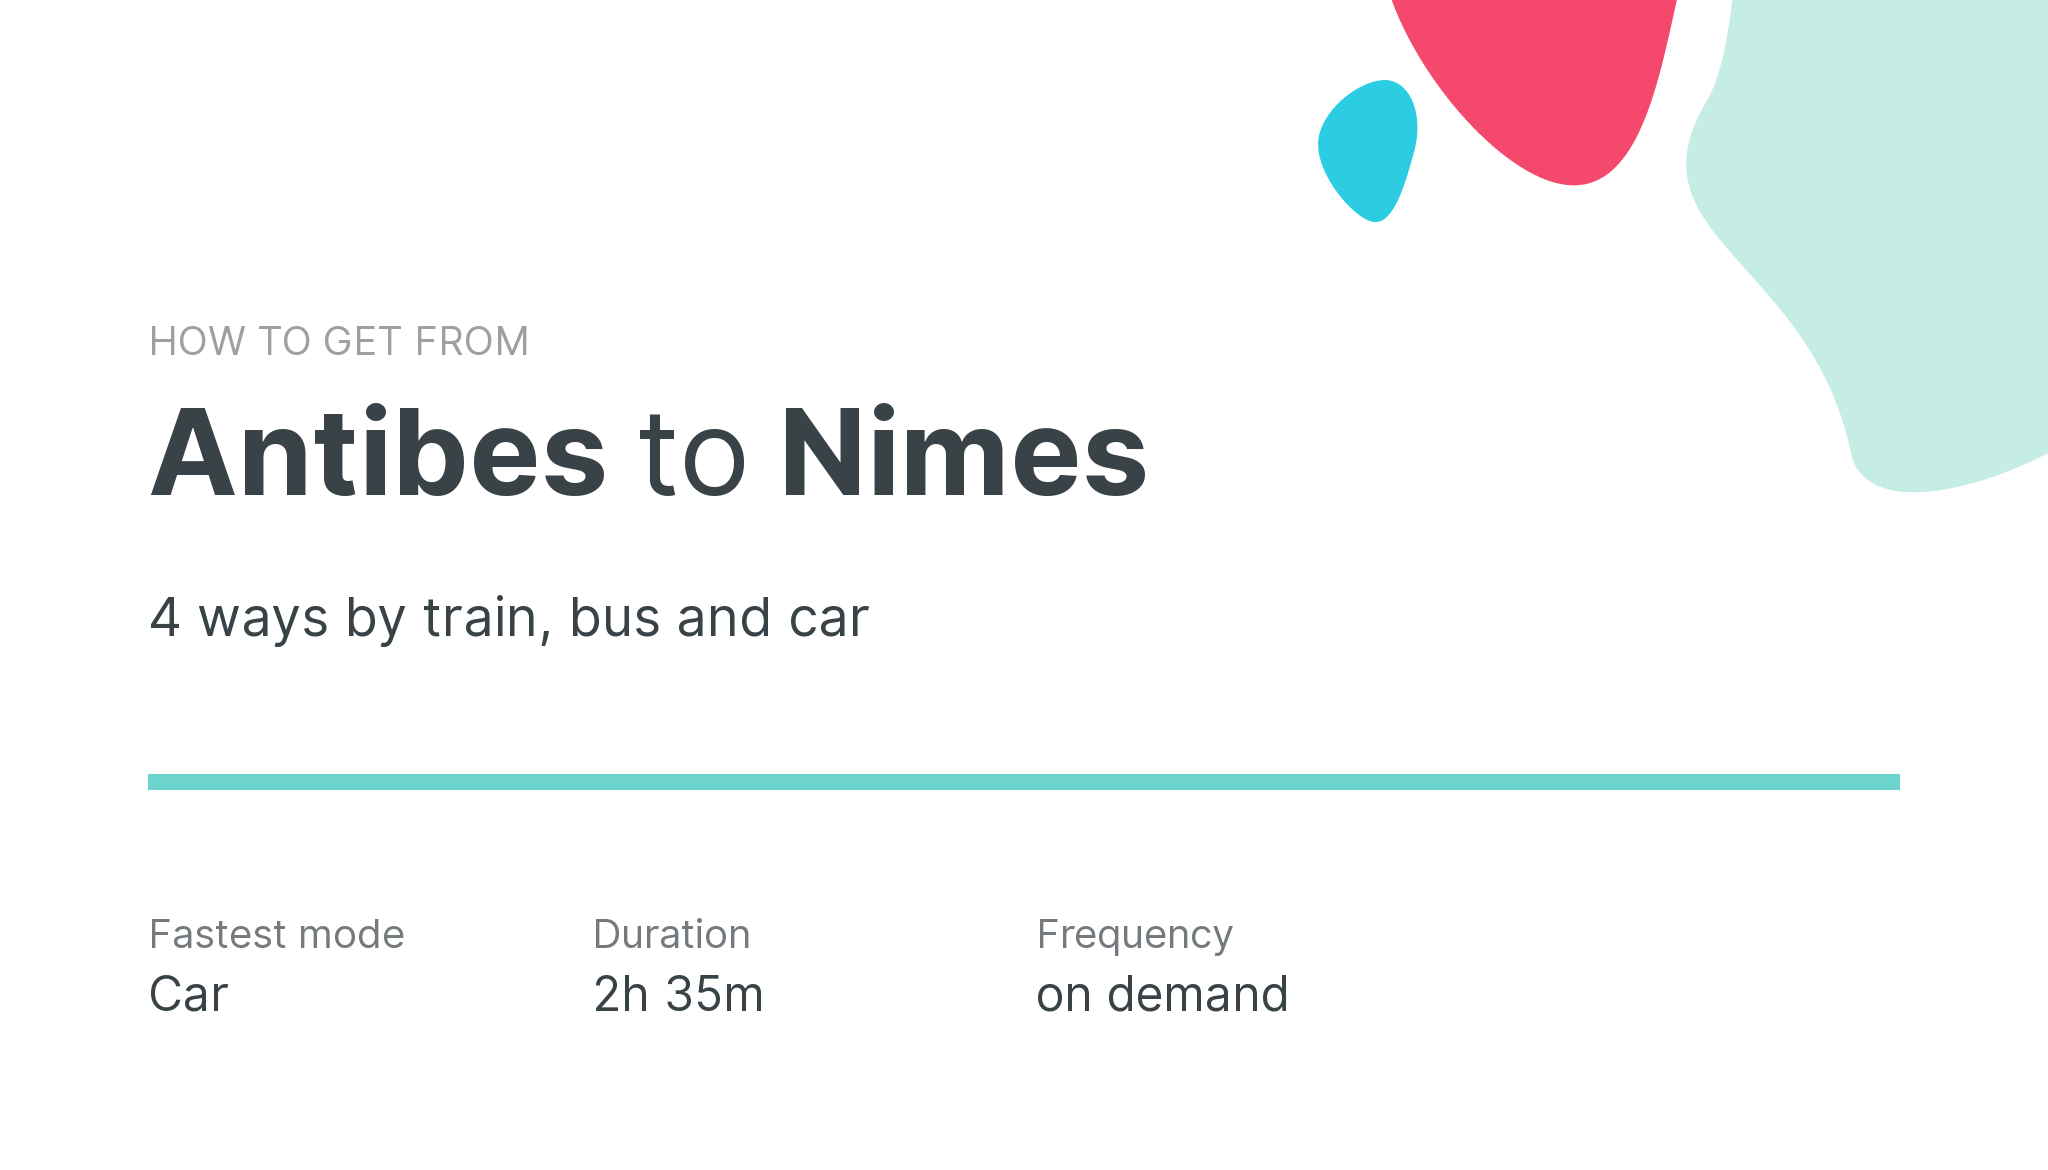 How do I get from Antibes to Nimes